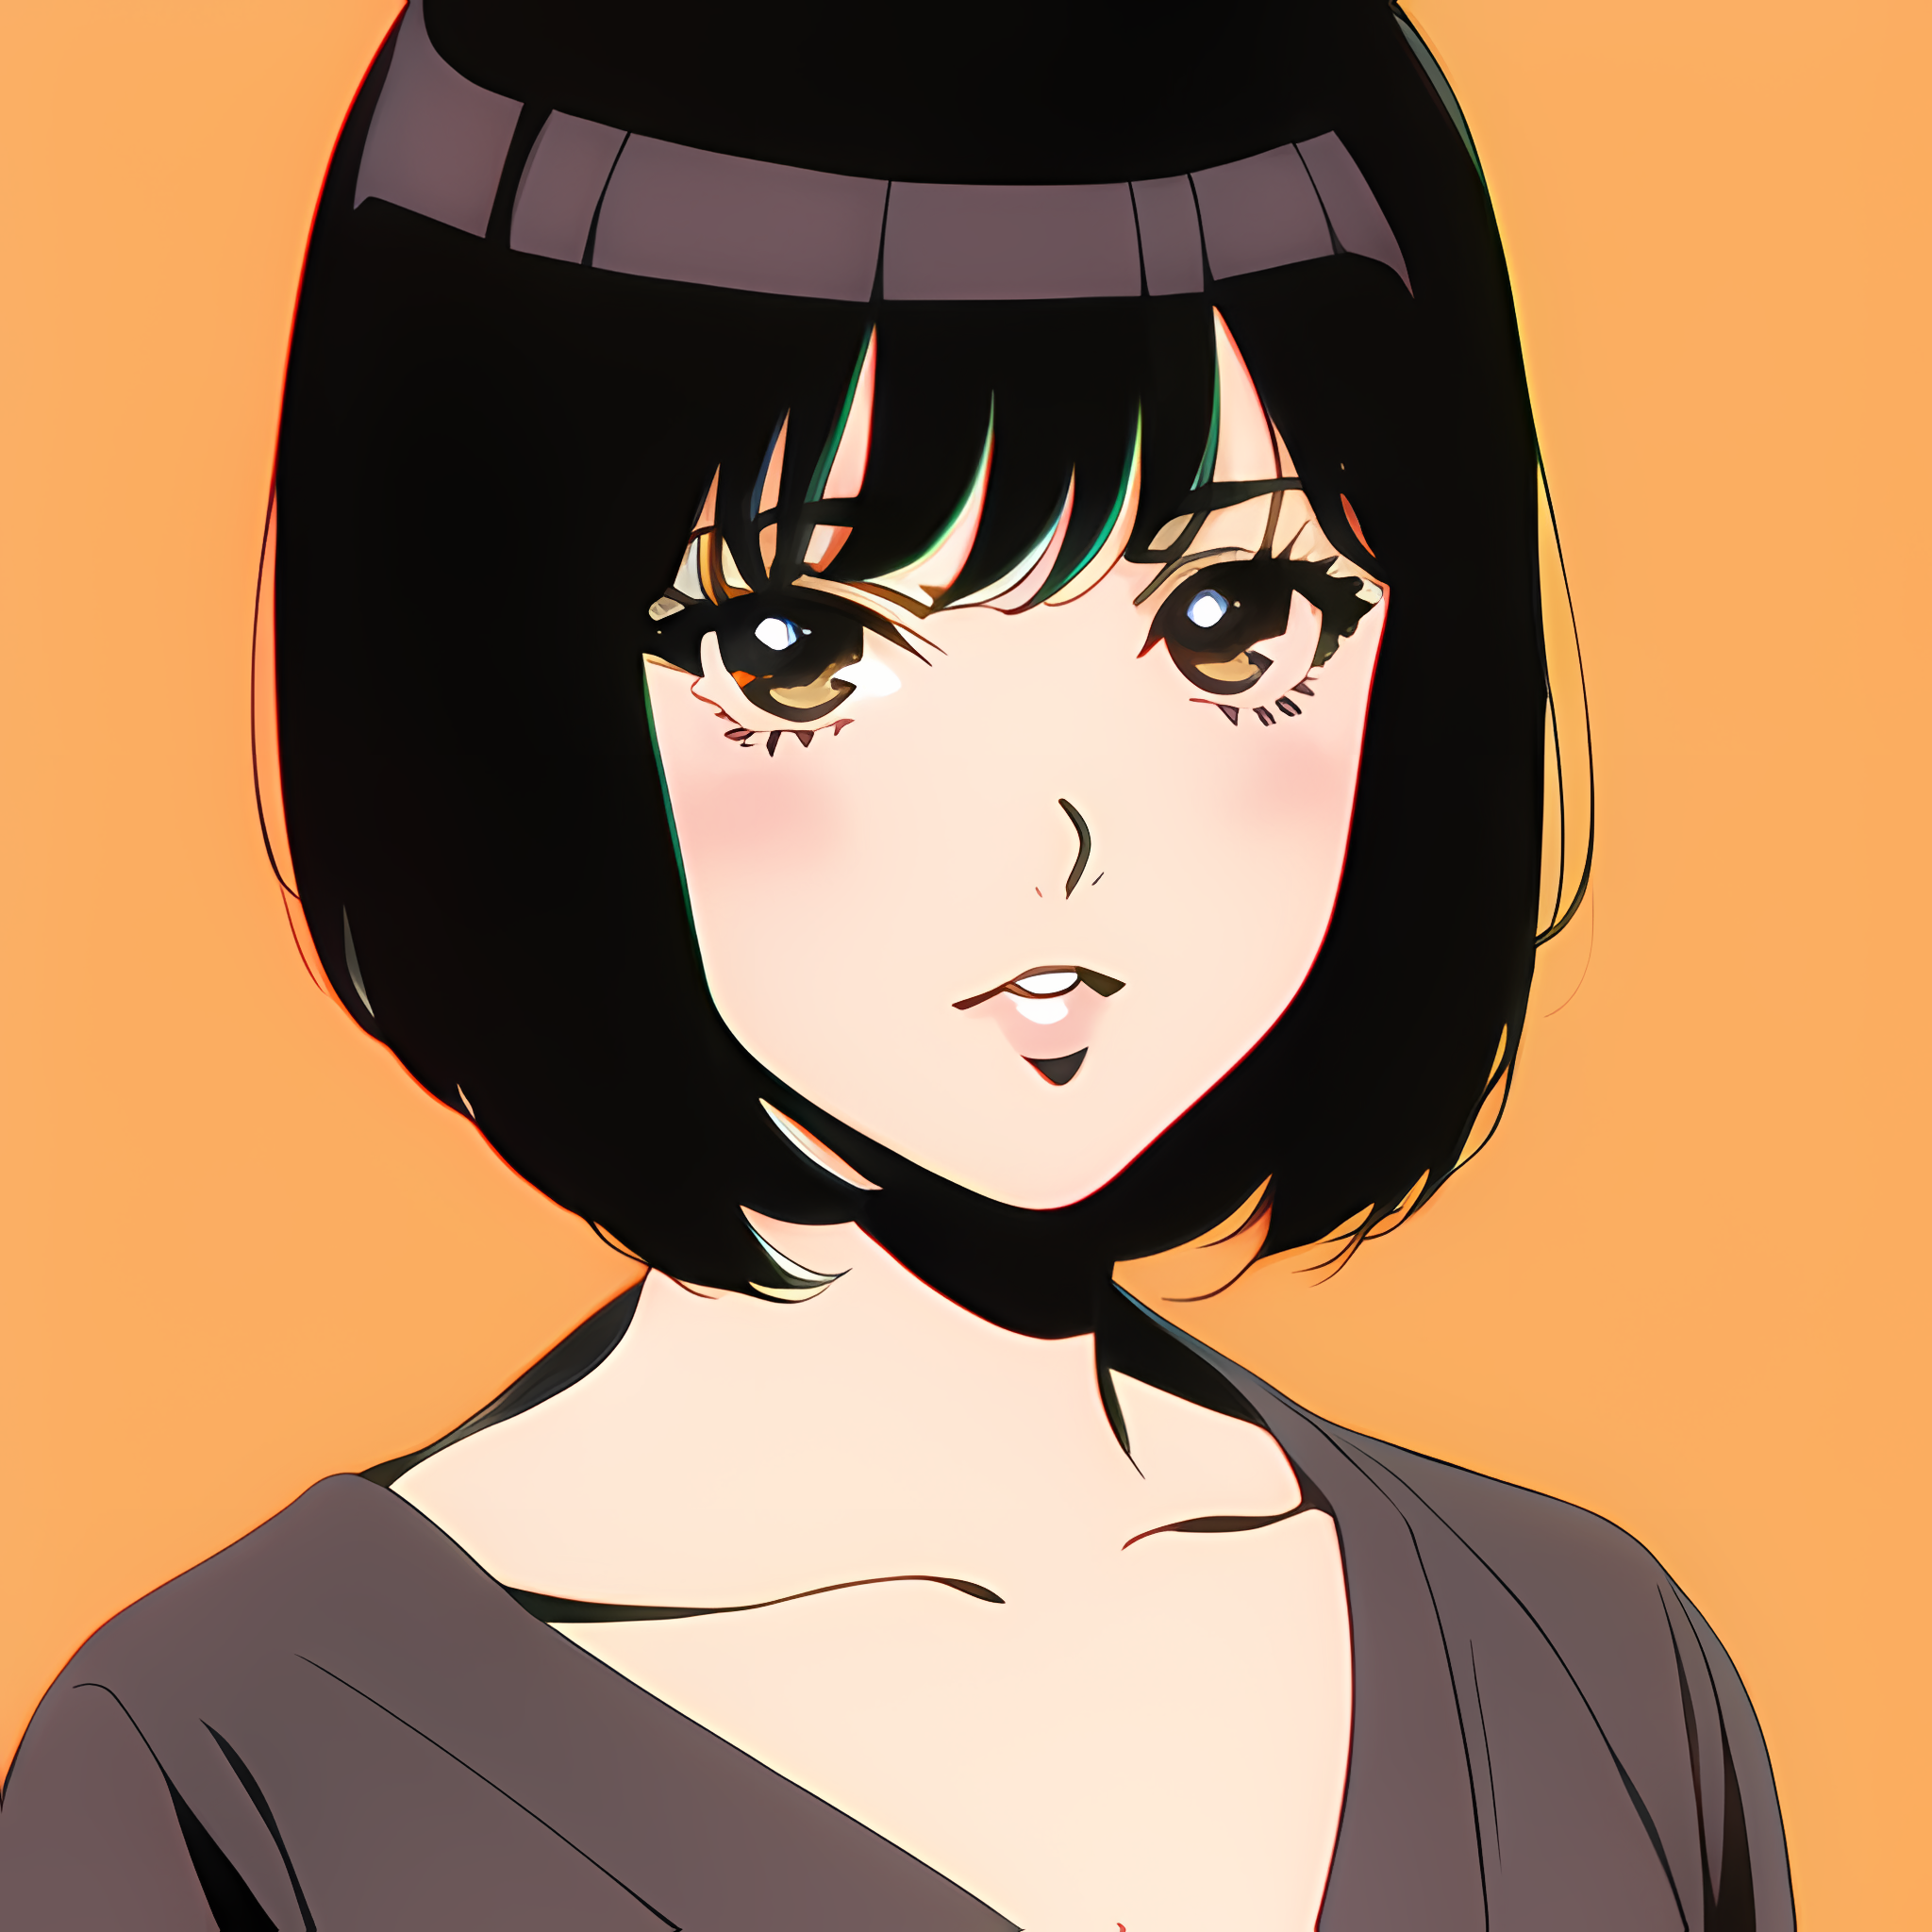 Looking For Anime Girls With Short Hair? Here Are 27+ Of The BEST!